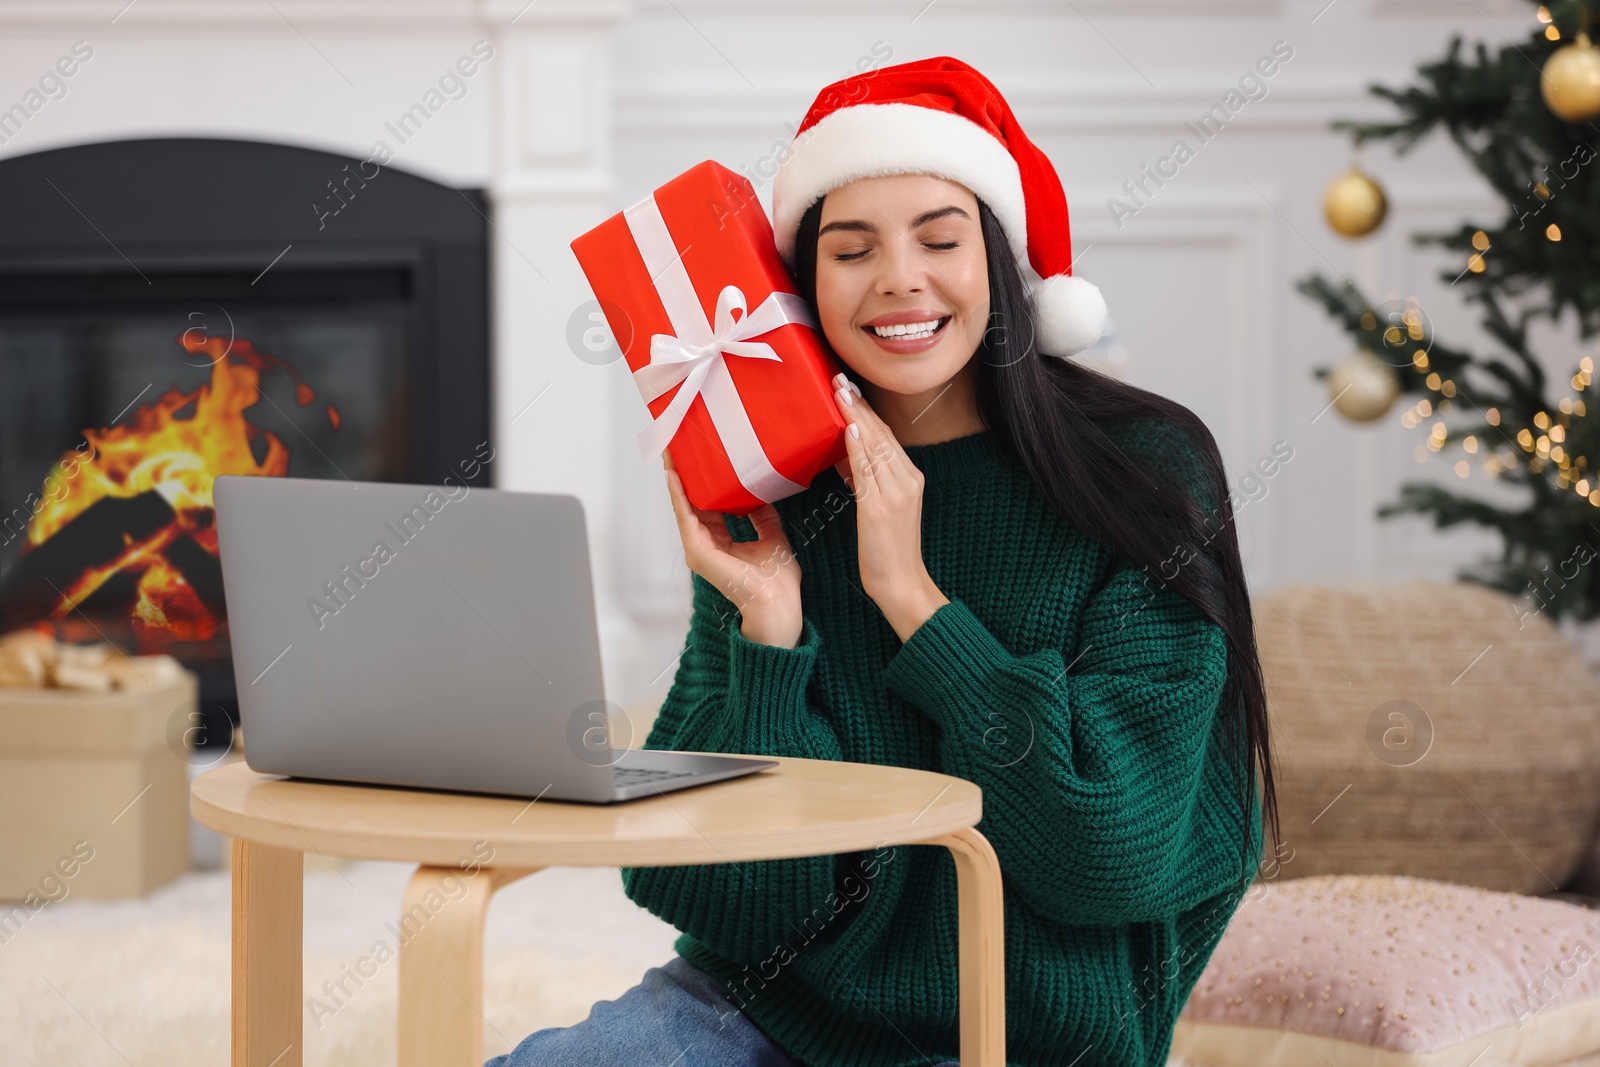 Photo of Celebrating Christmas online with exchanged by mail presents. Smiling woman in Santa hat with gift box during video call on laptop at home